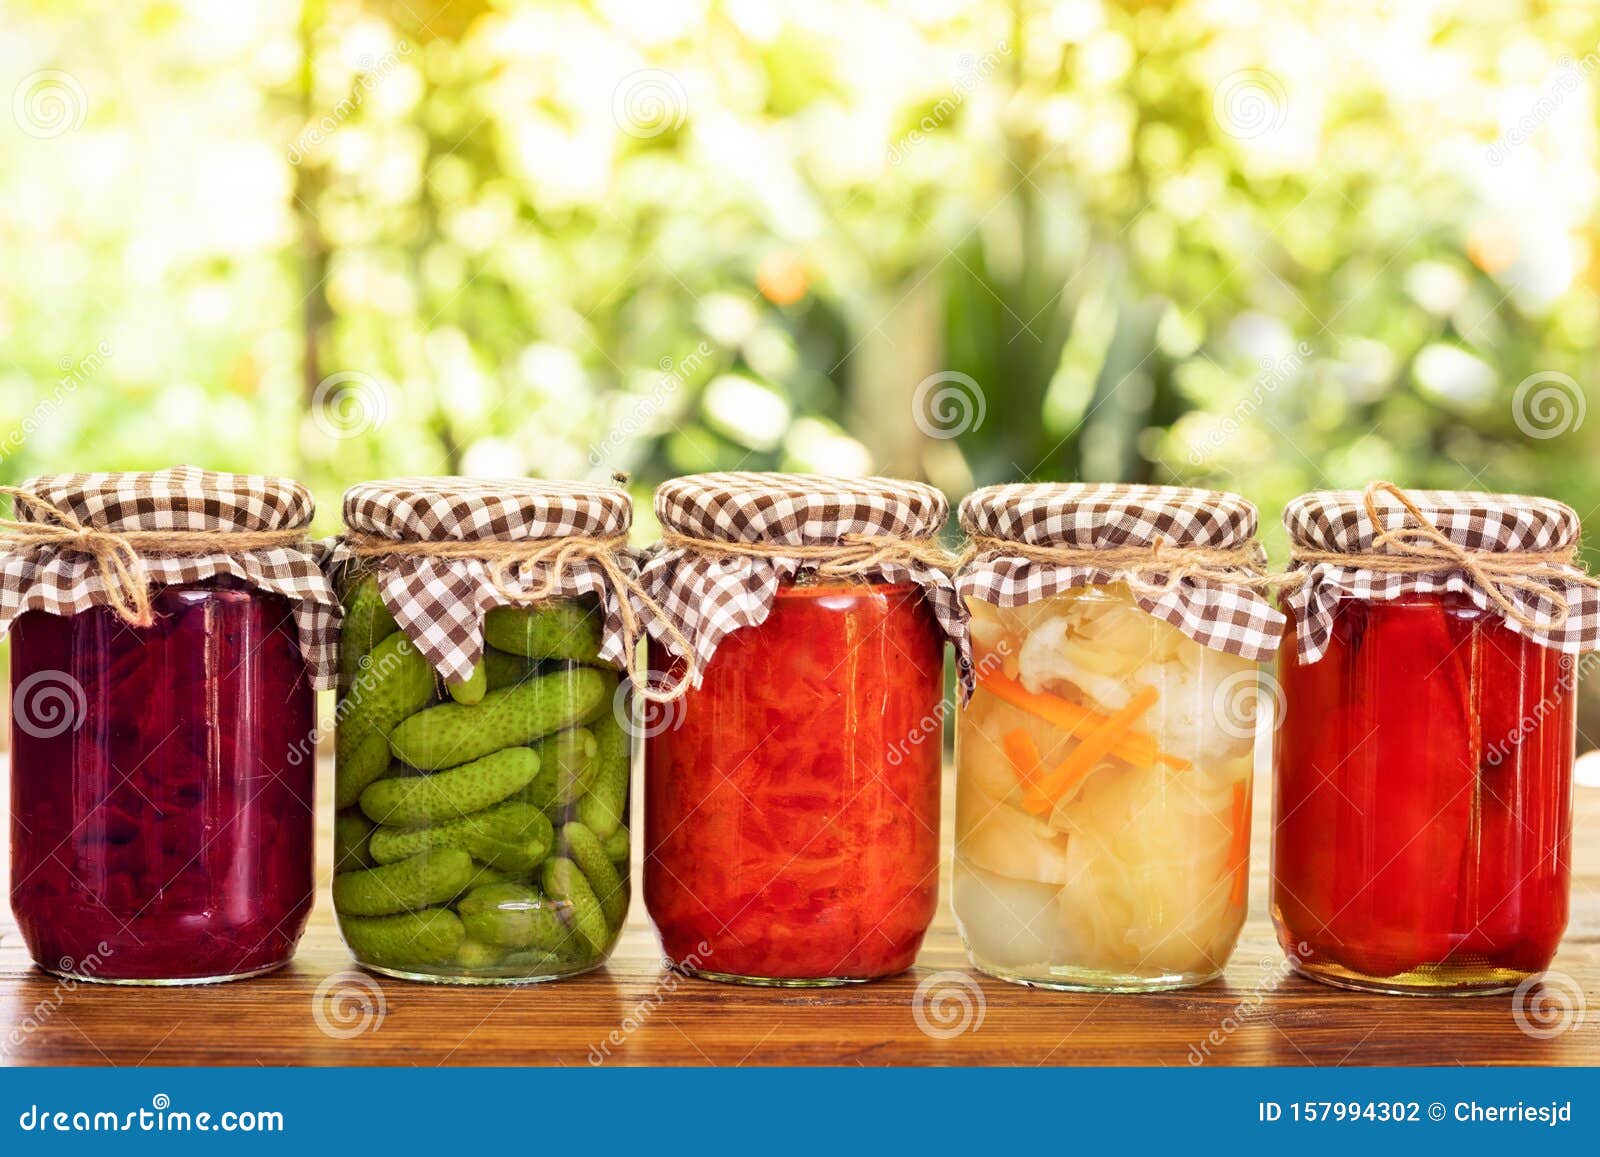 marinated pickled and fermented vegetables